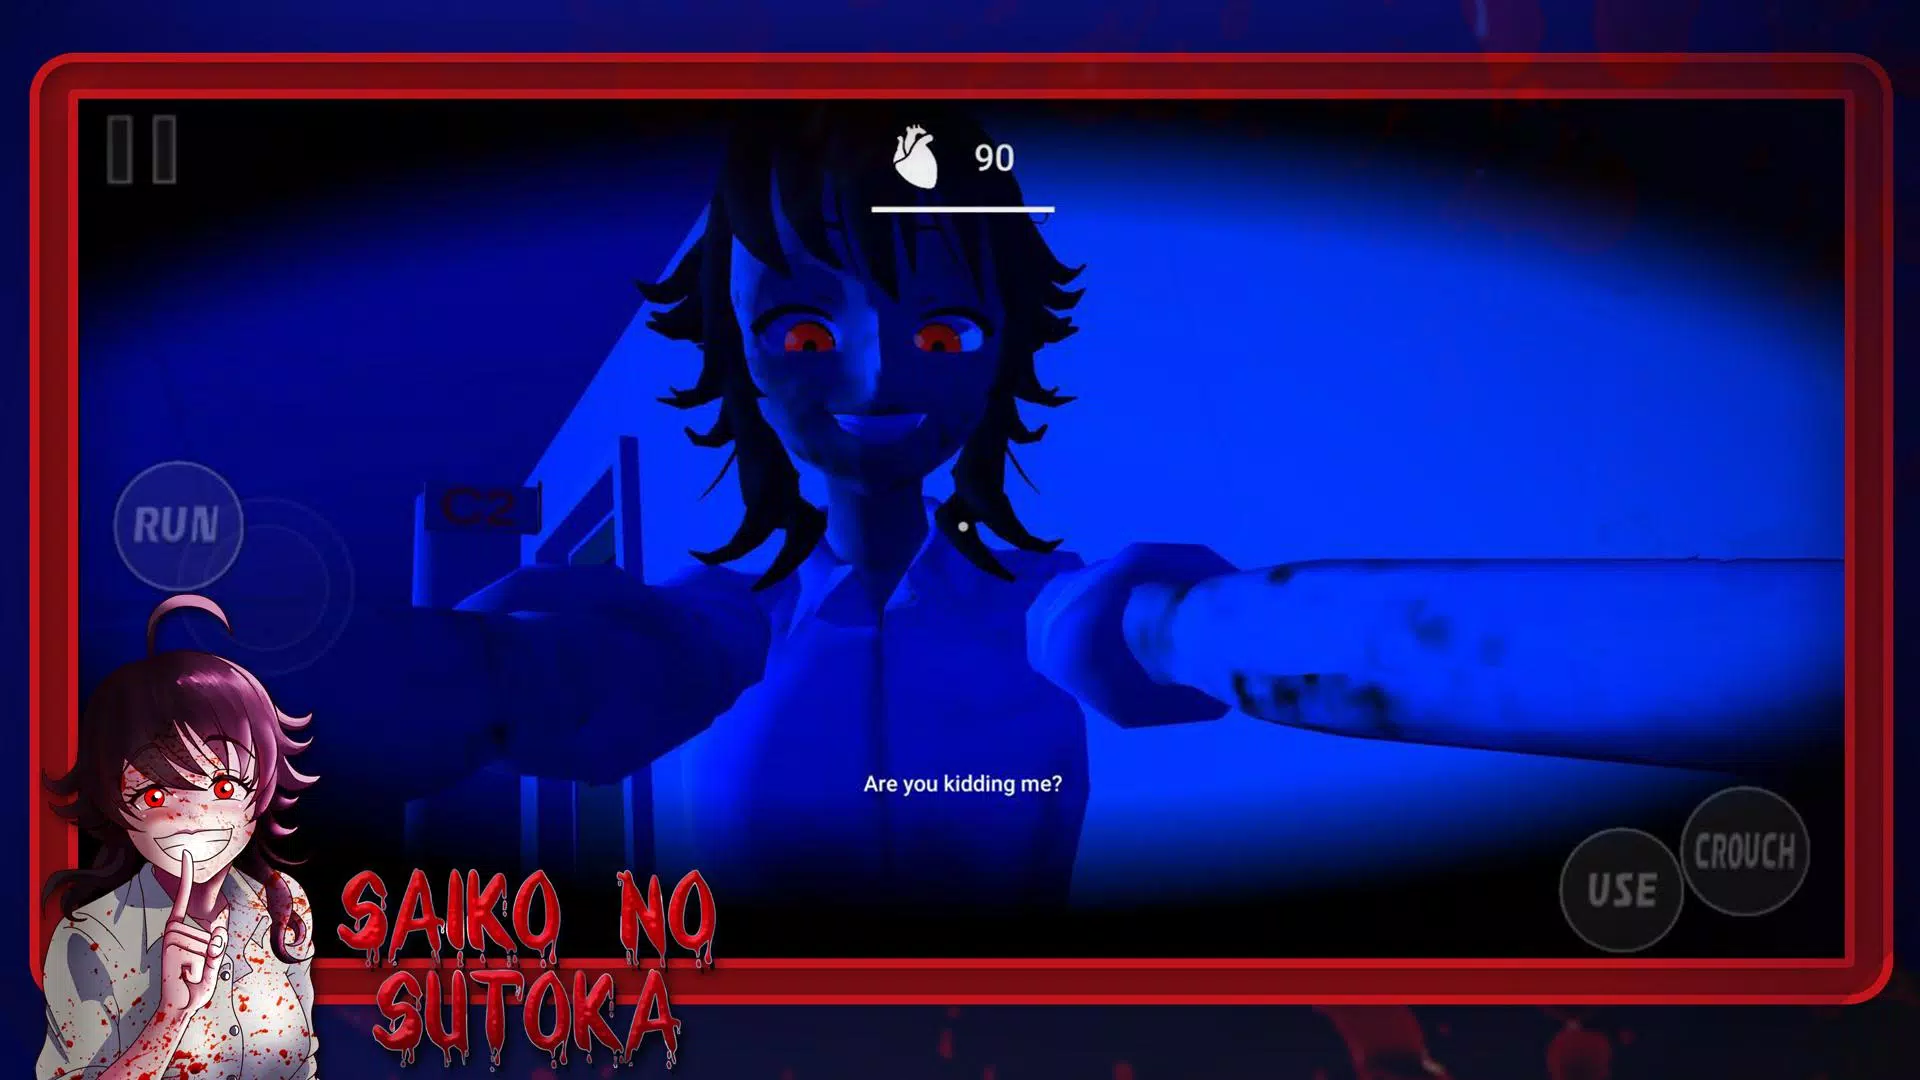 Saiko+ APK for Android Download